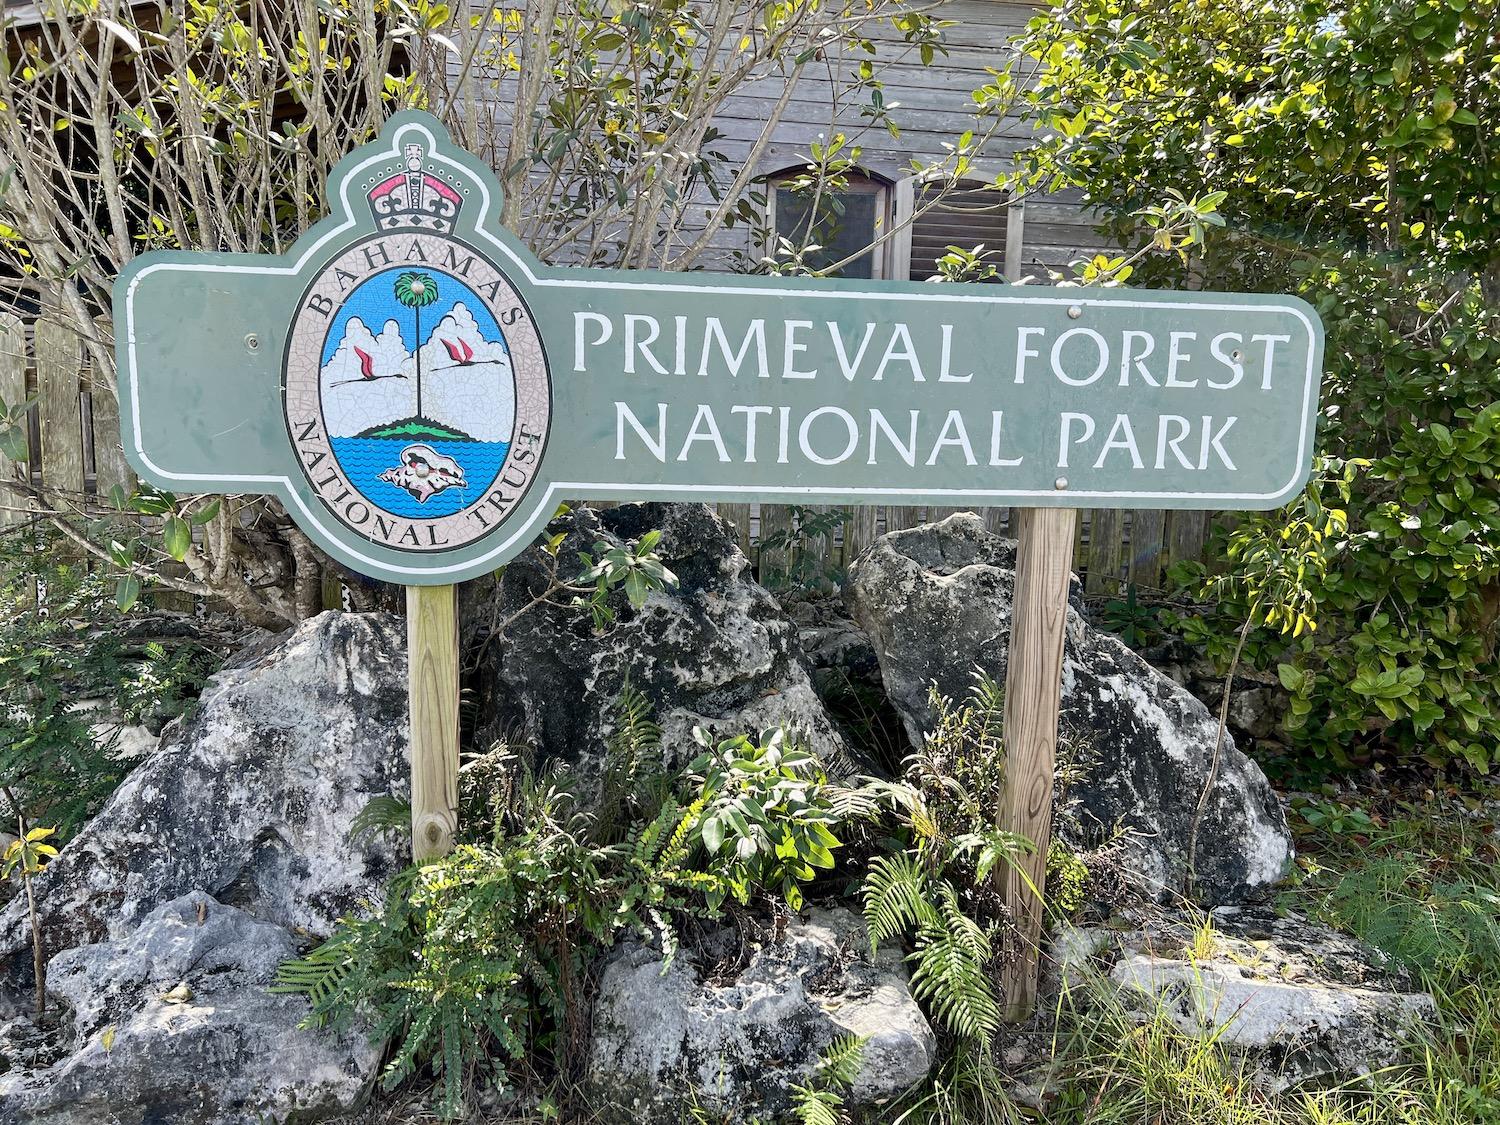 Primeval Forest National Park is an easy drive, or cab ride, from downtown Nassau.